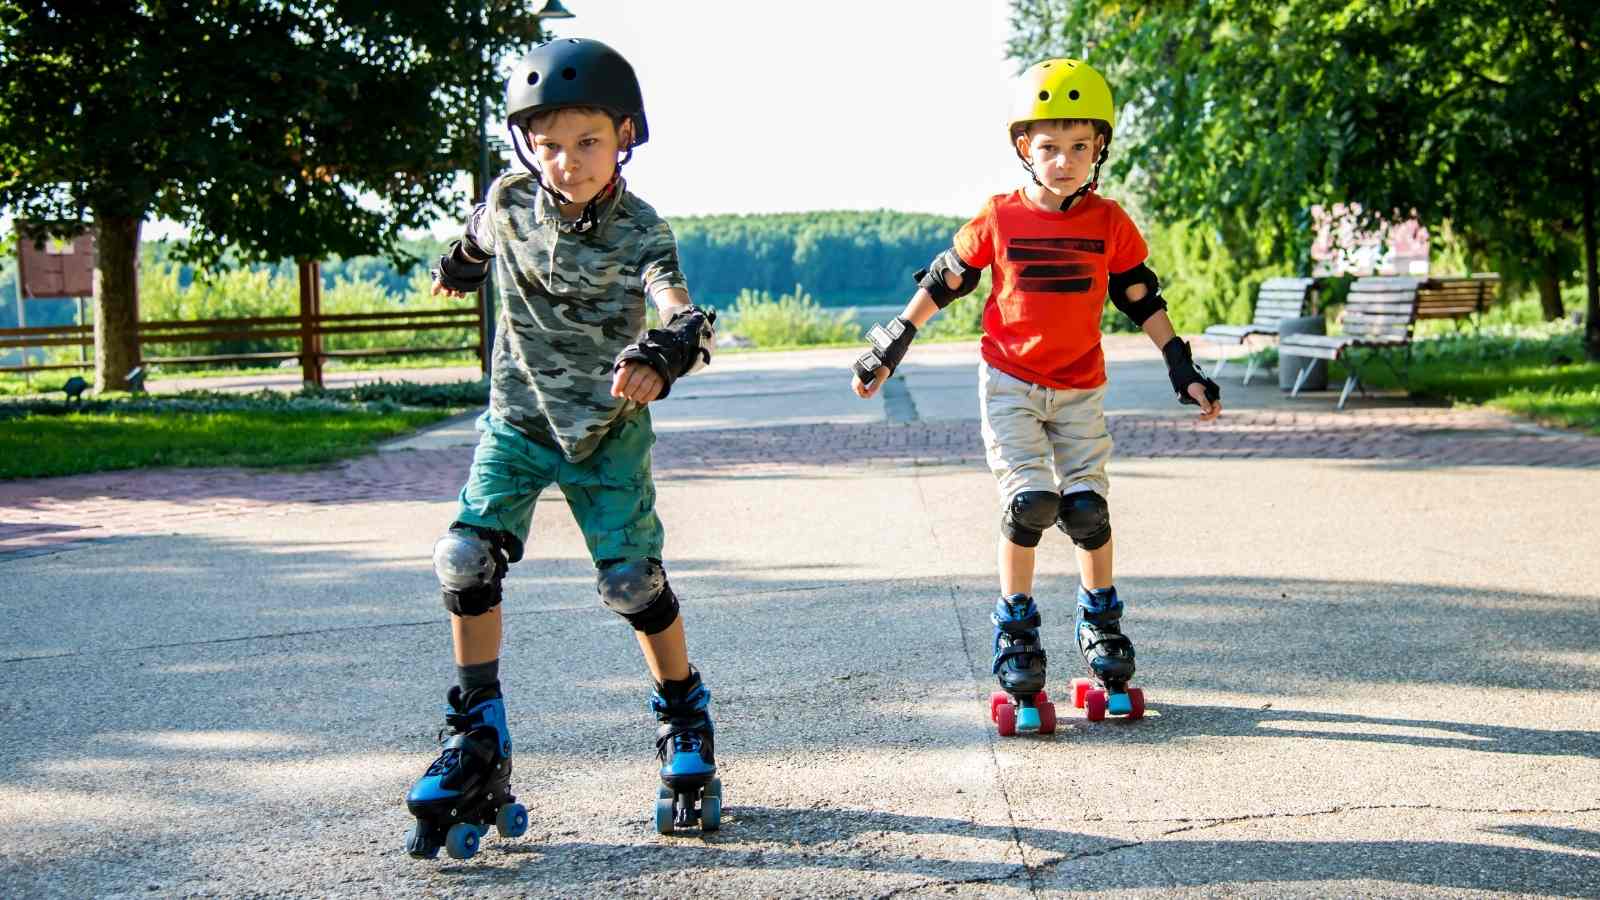 Find your perfect size of children's roller skates